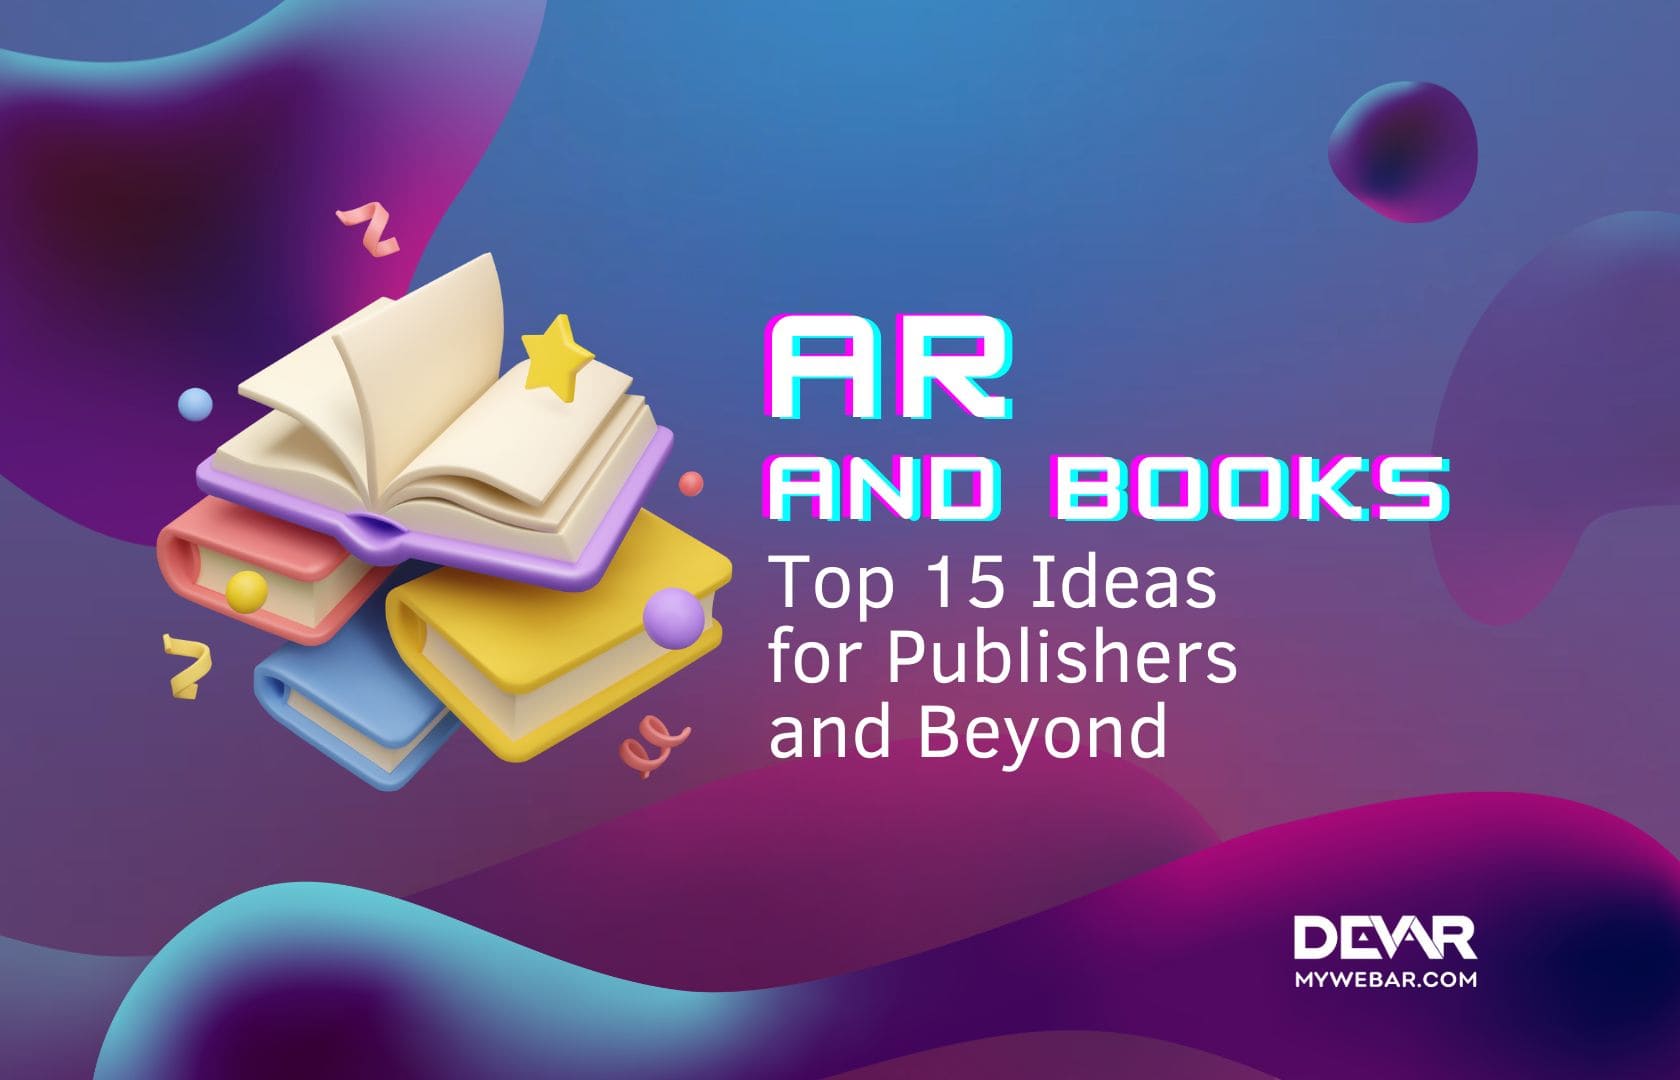 AR and Books: Top 15 Ideas for Publishers and Beyond